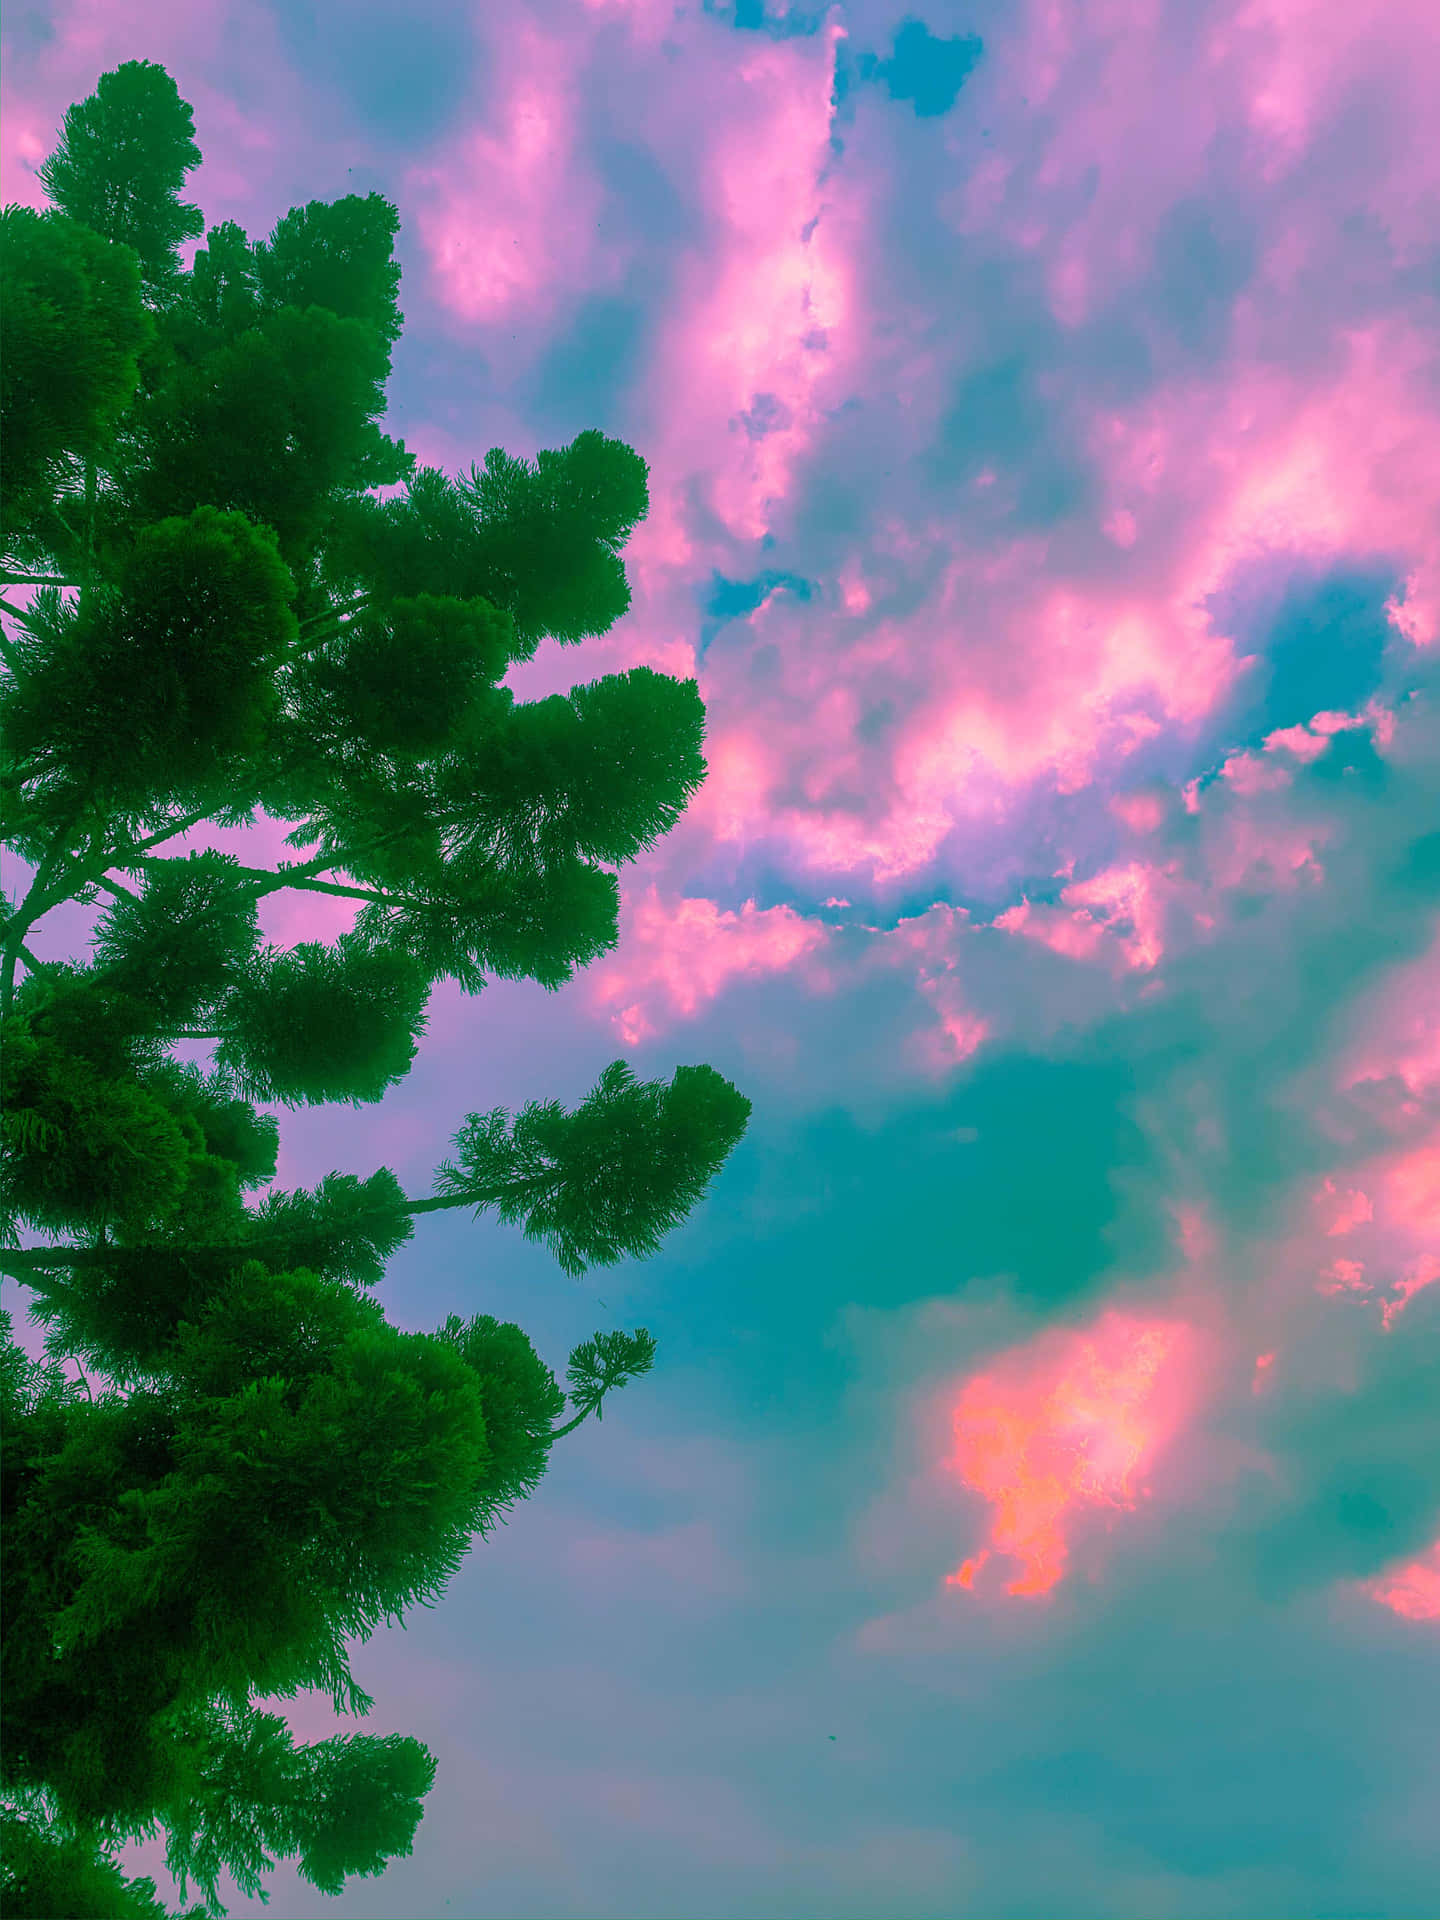 Trippy Aesthetic Cloud With Tree Wallpaper